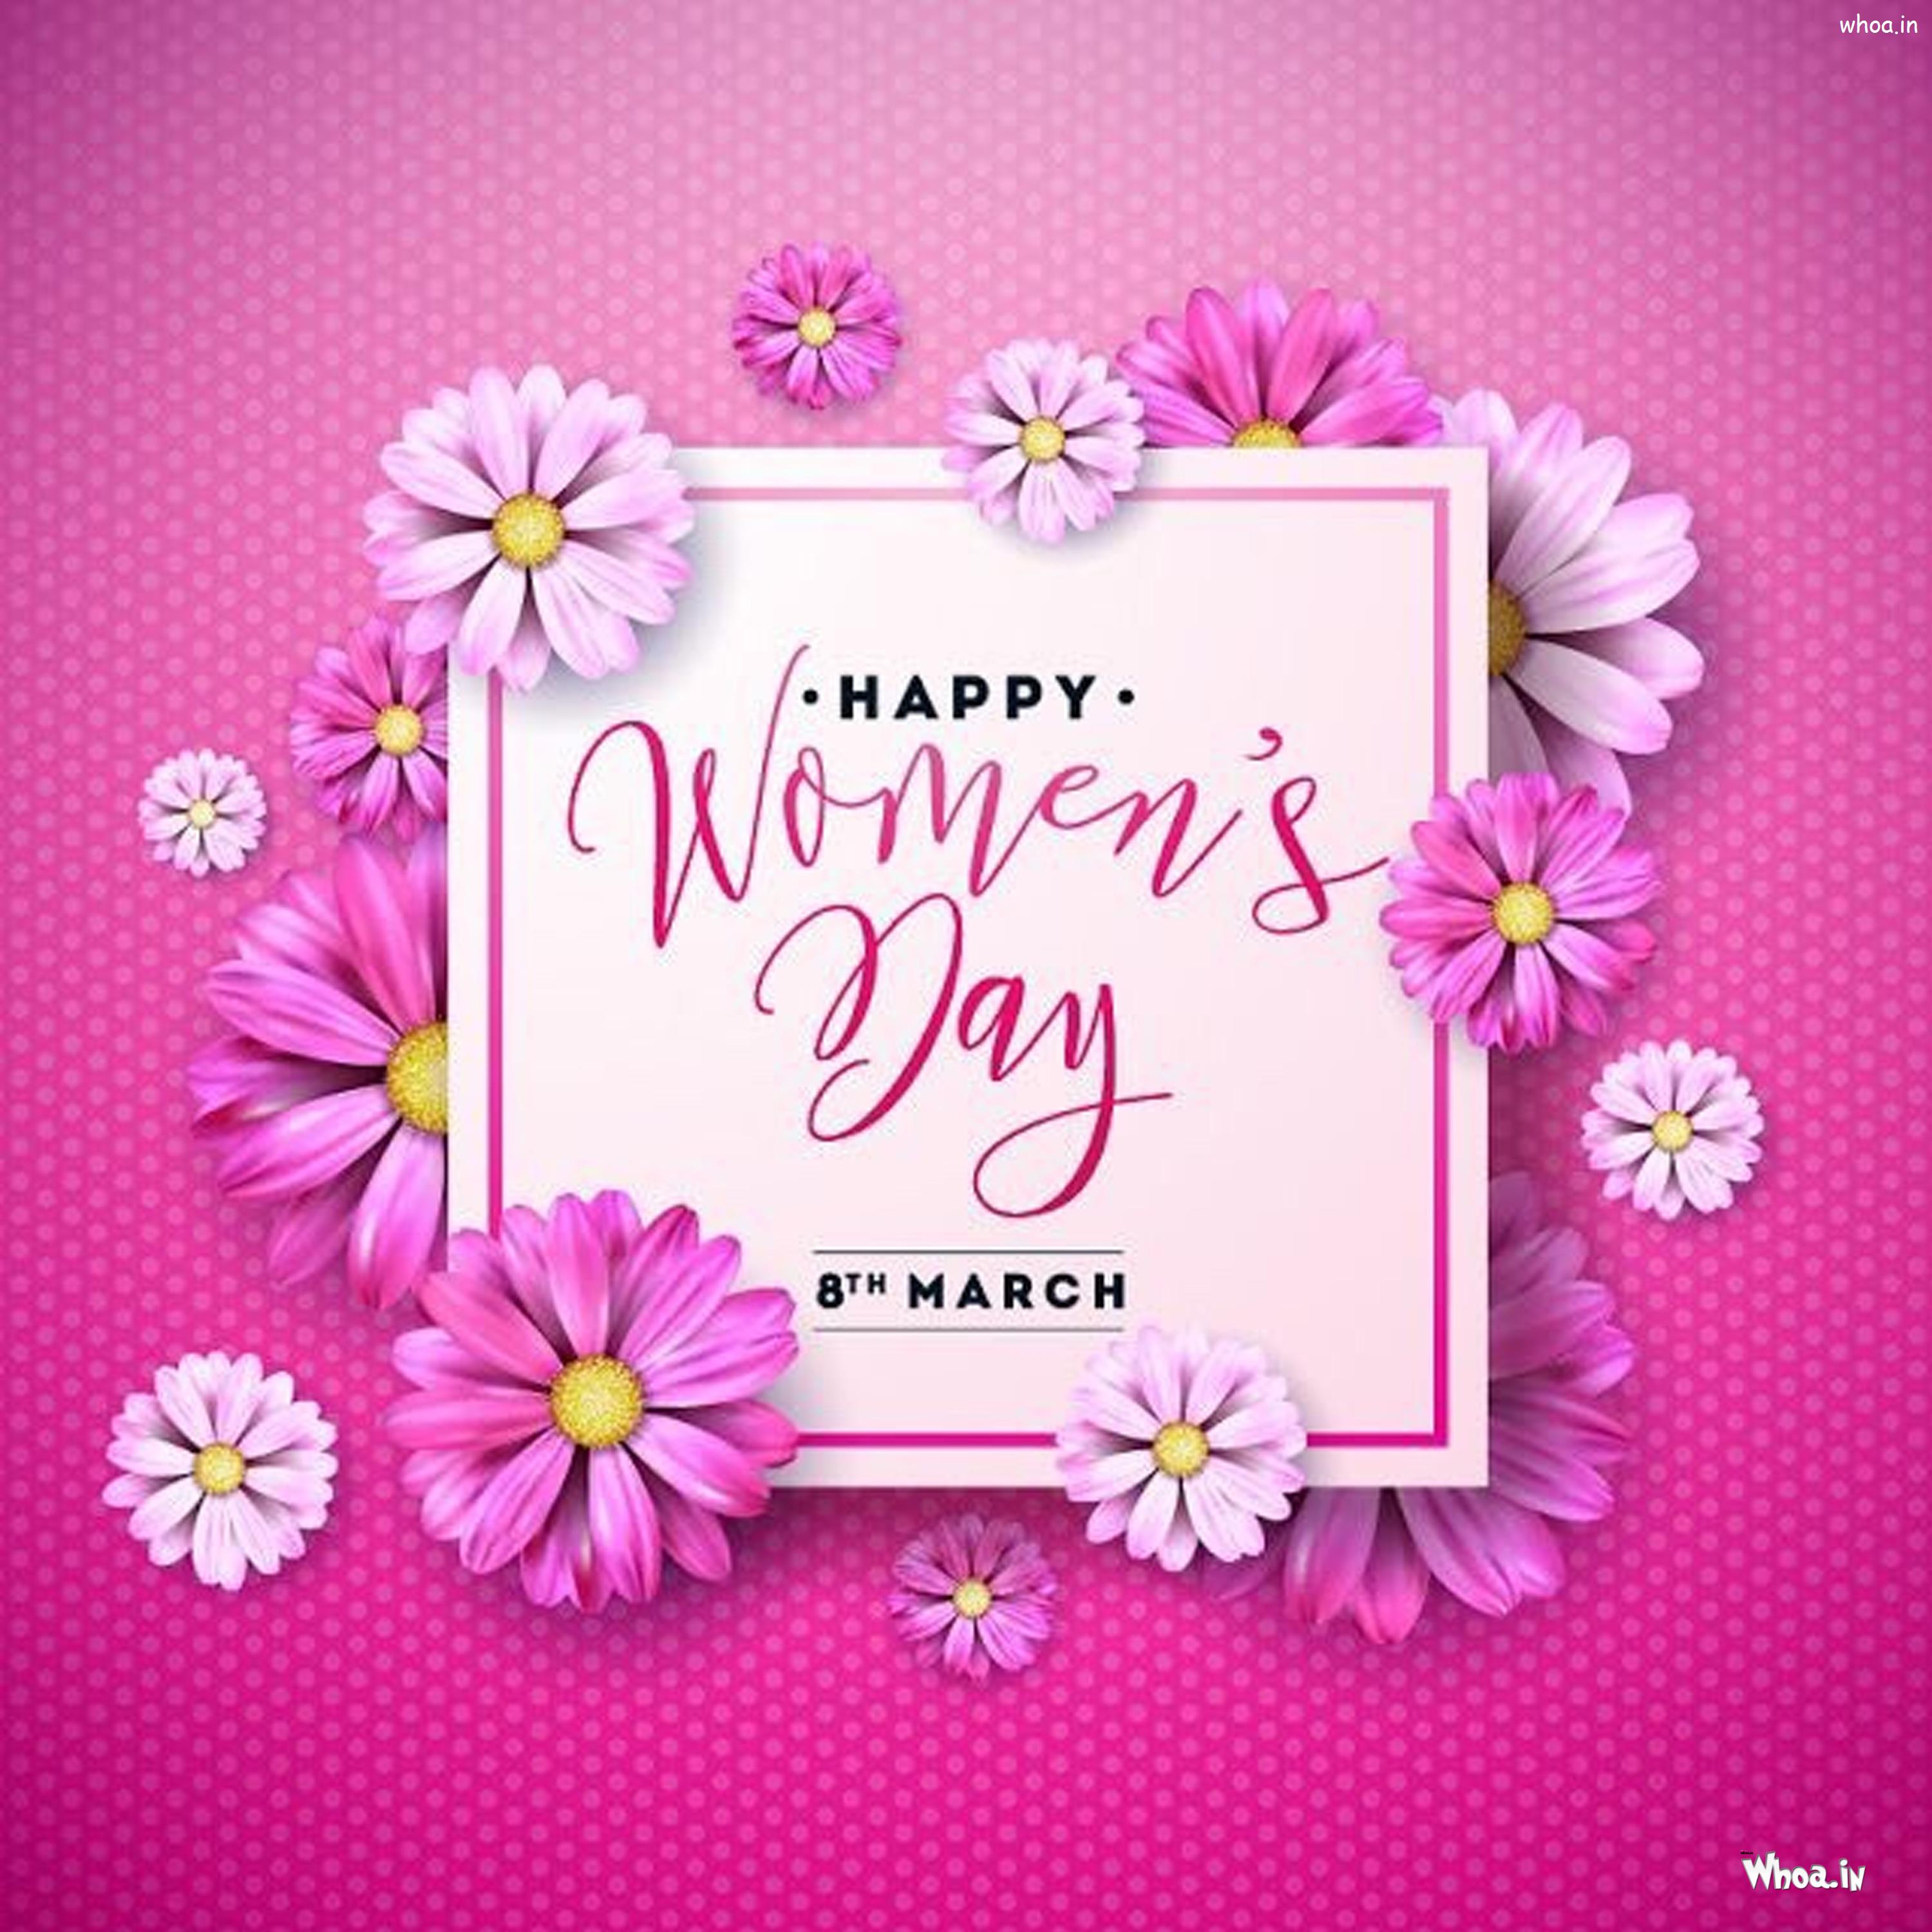 International Womens Day -International Womens Day Wishes